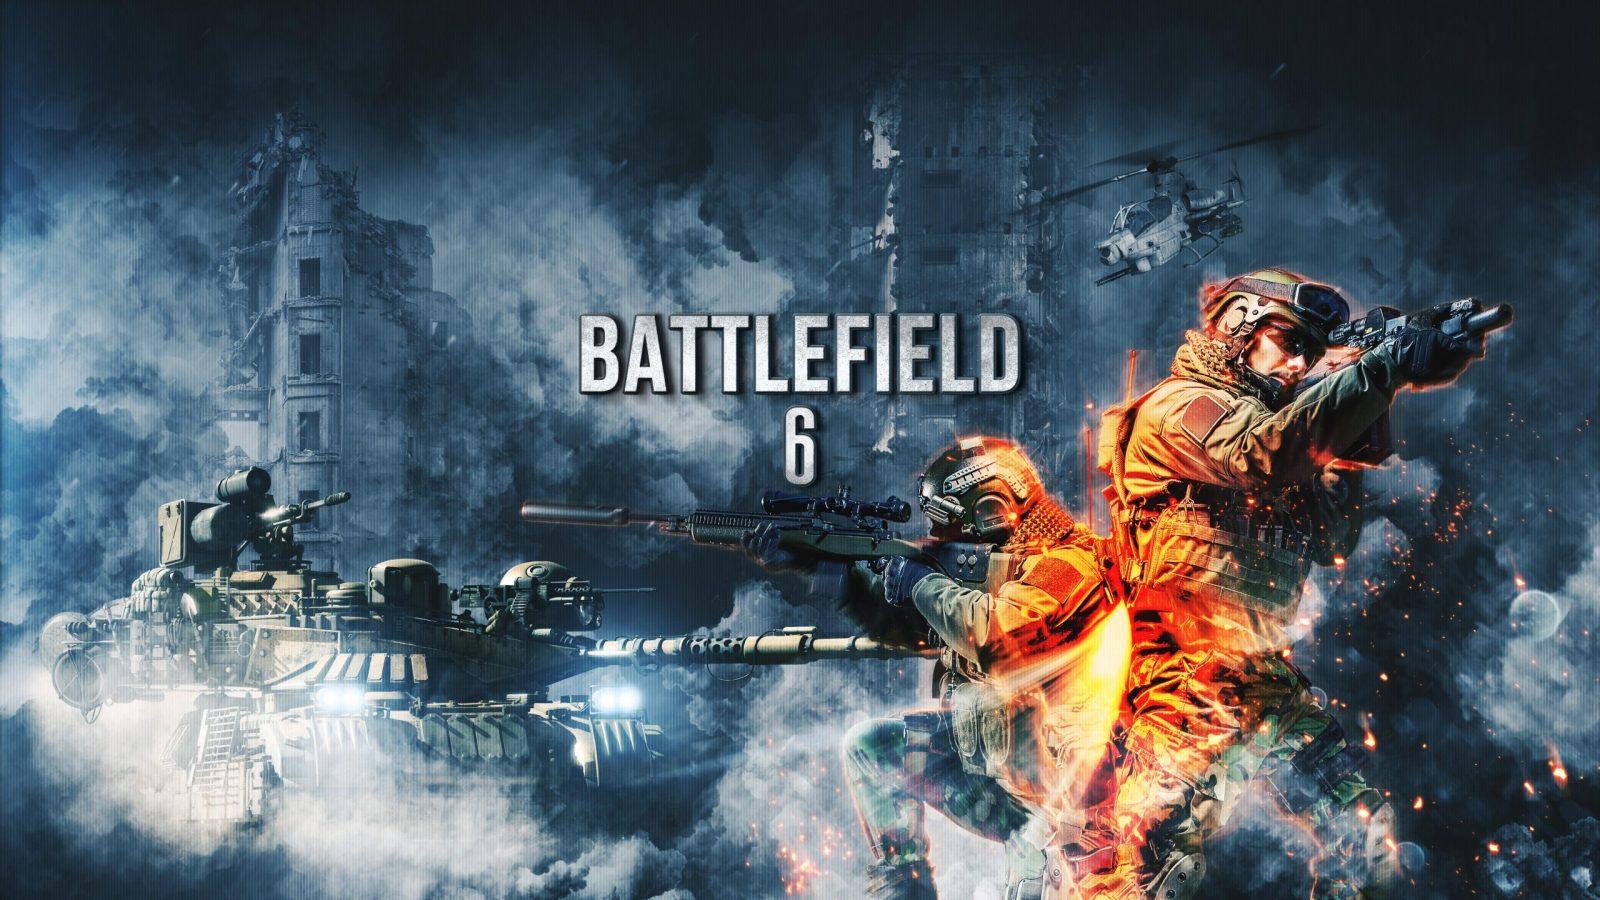 Battlefield 6 Announced by EA to be Released on Holiday 2021